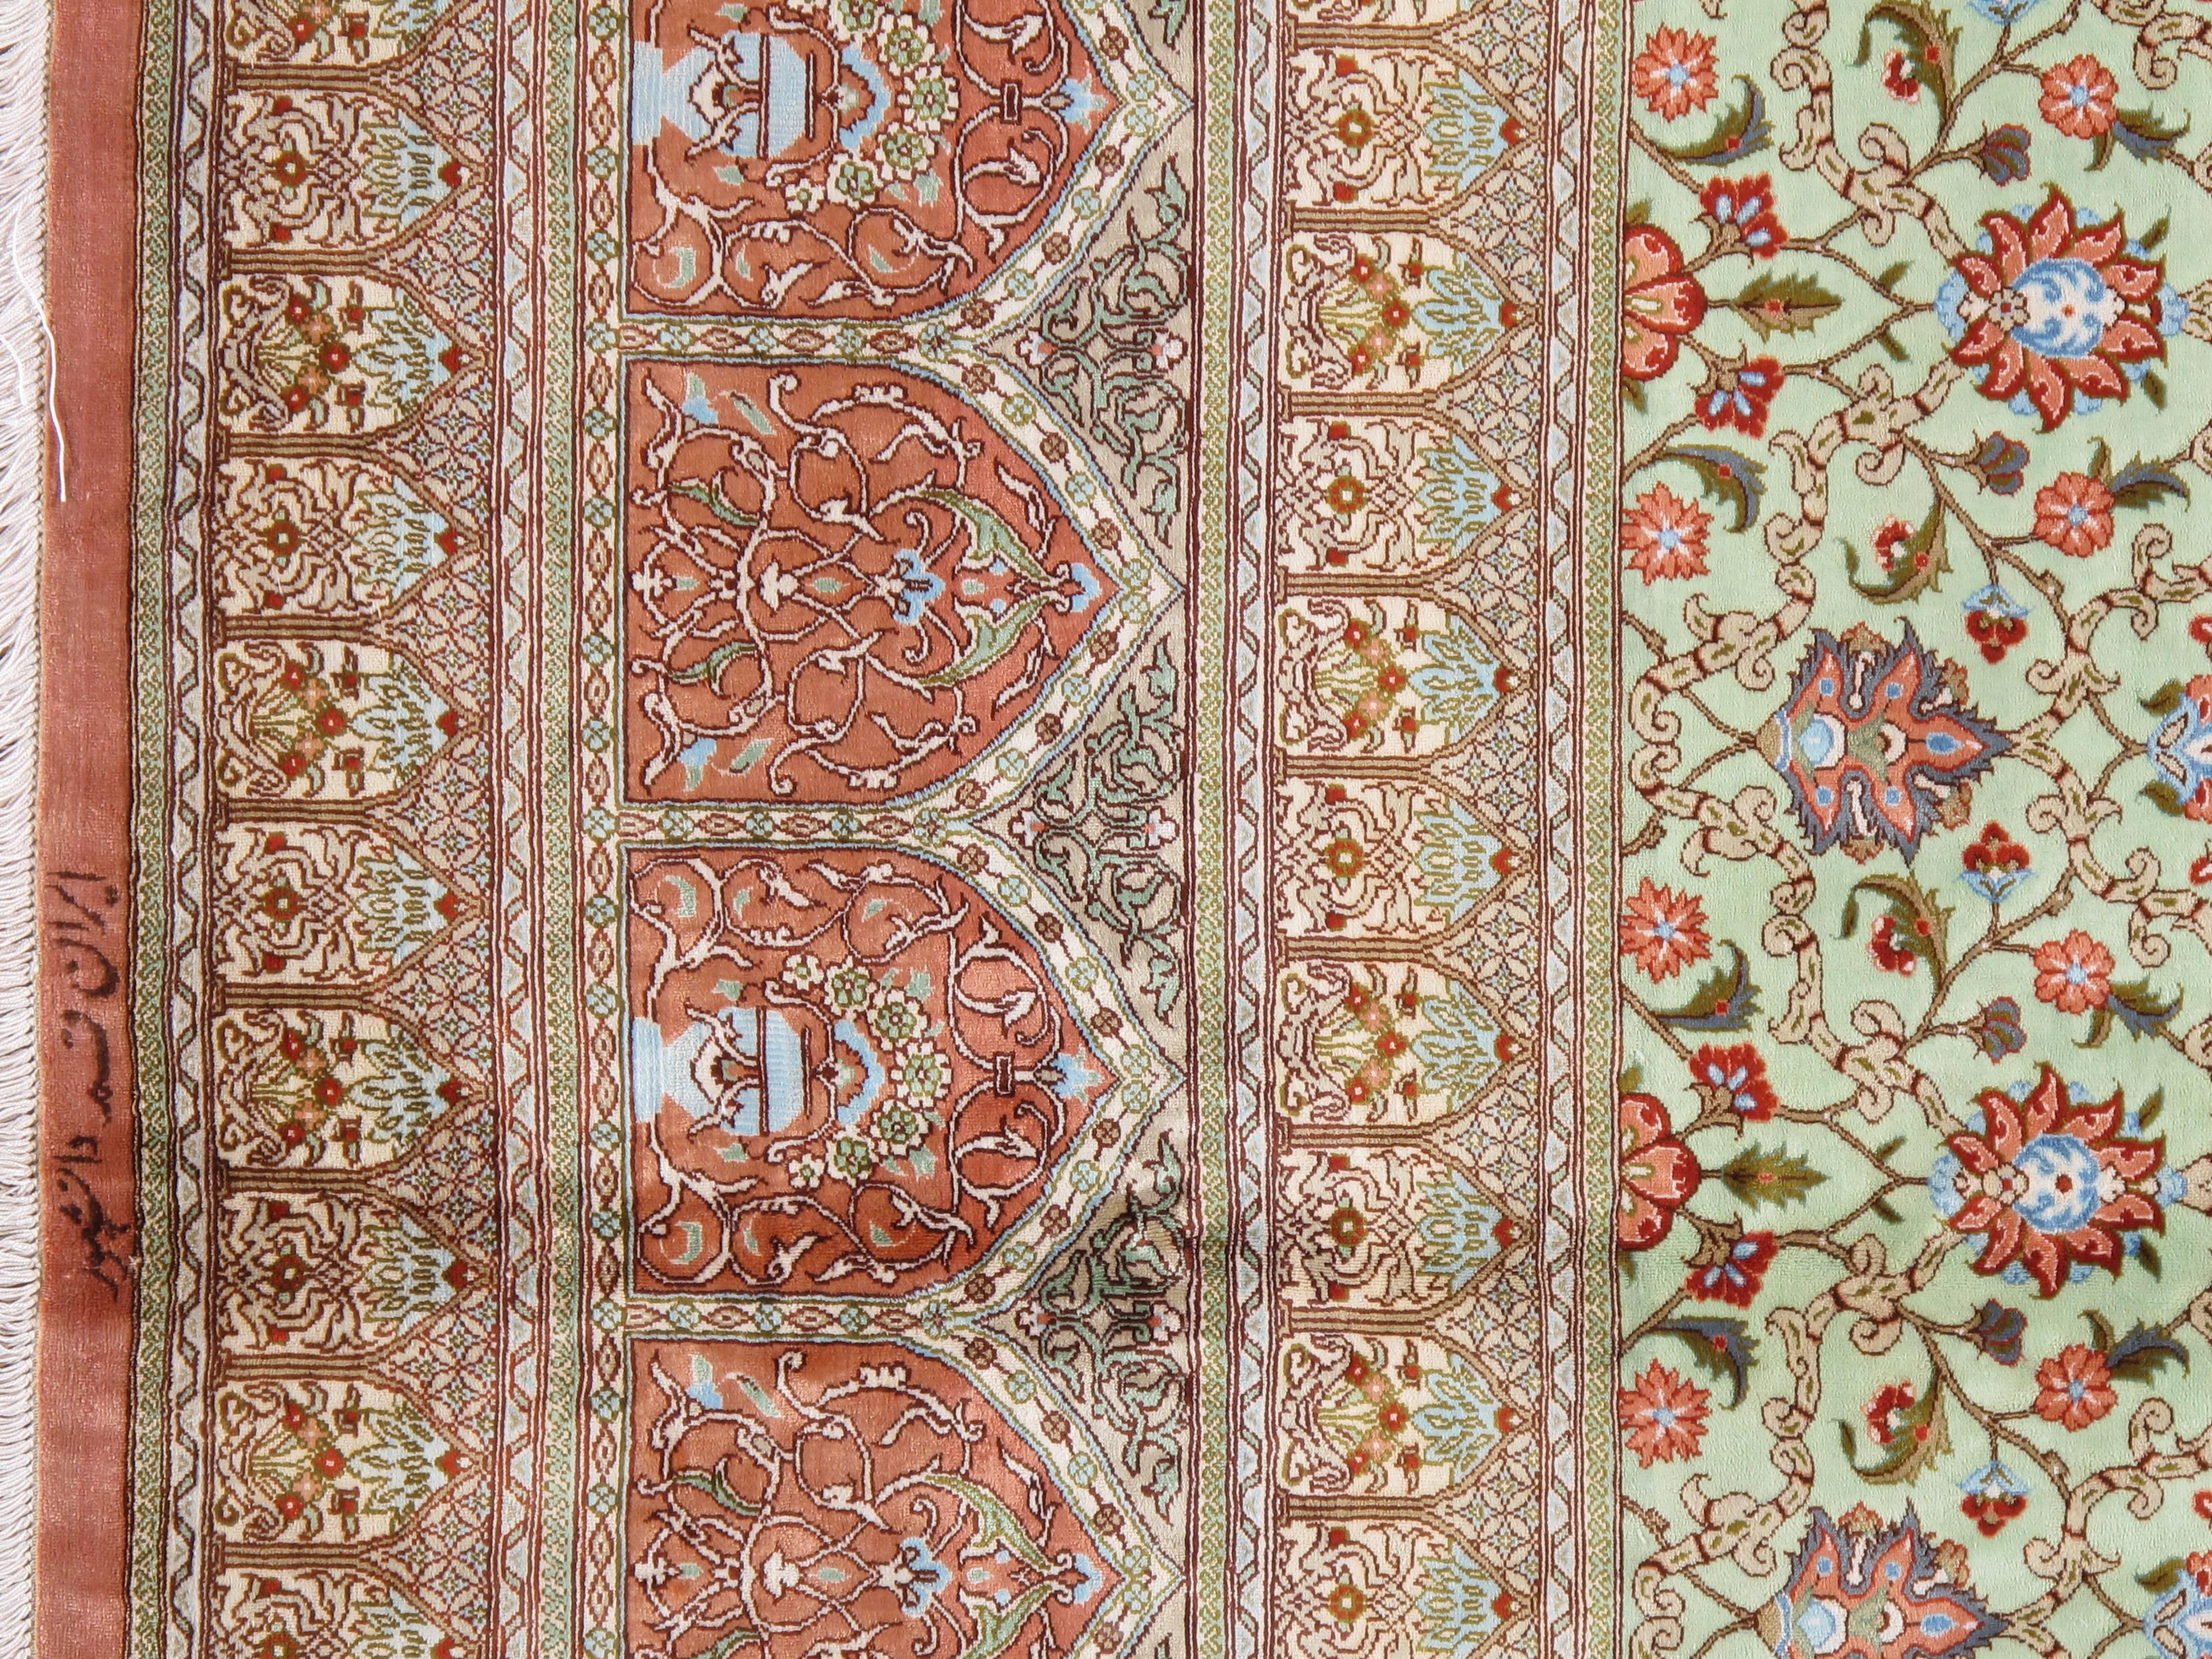 Extremely fine woven Persian silk carpet have silk pile on silk foundation. Approximately 750-800 knots per square inch. Large room size is also very rare: 10' x 13'2